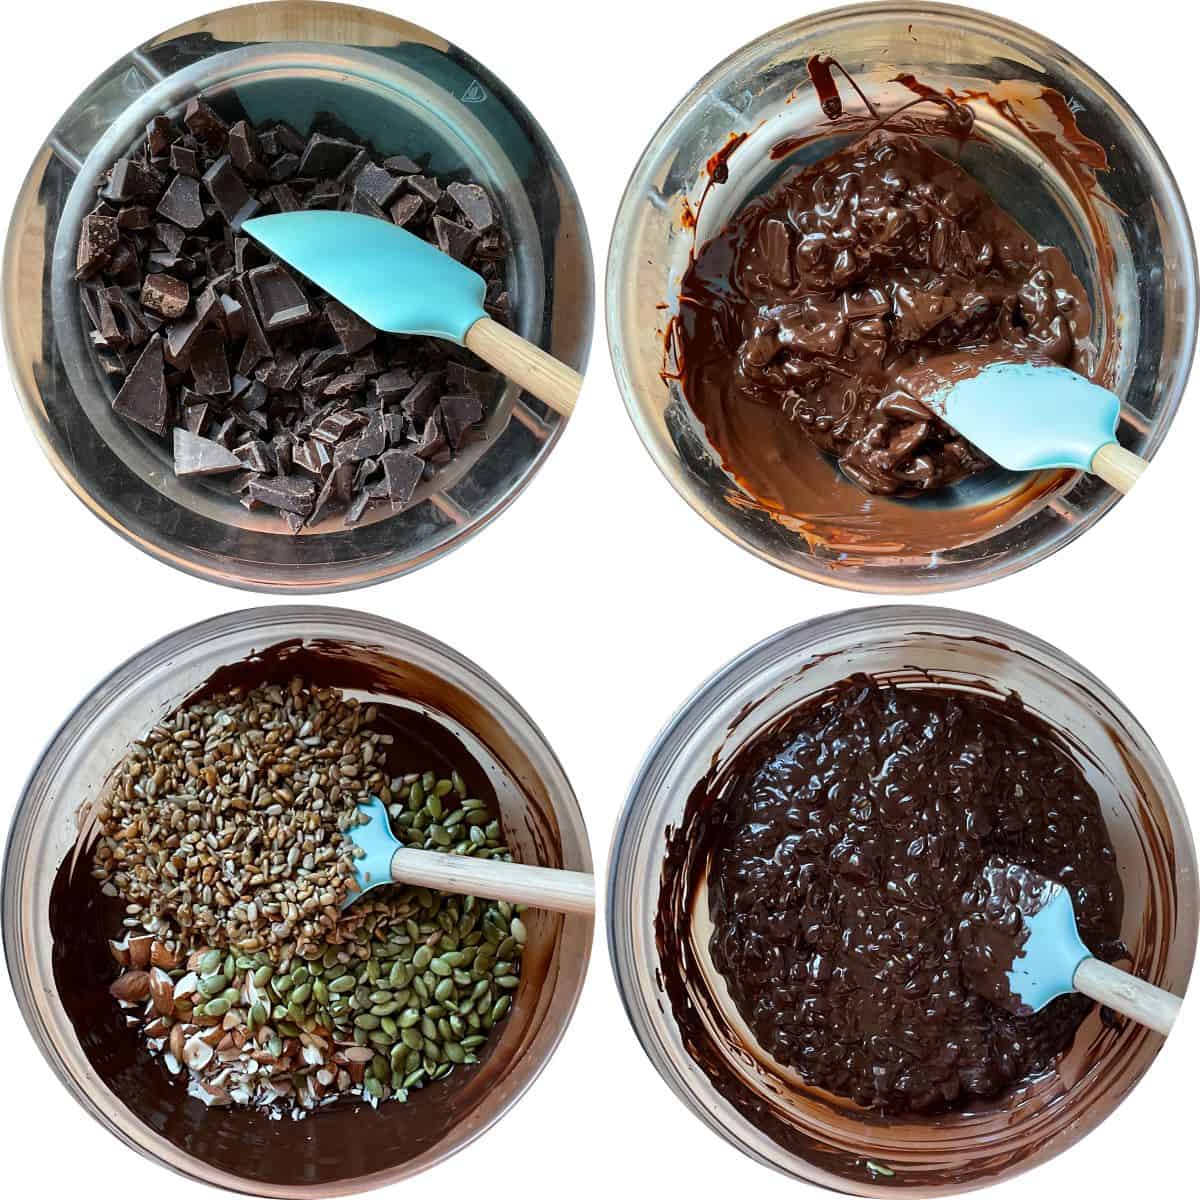 A photo collage of the chocolate being melted in a bowl.